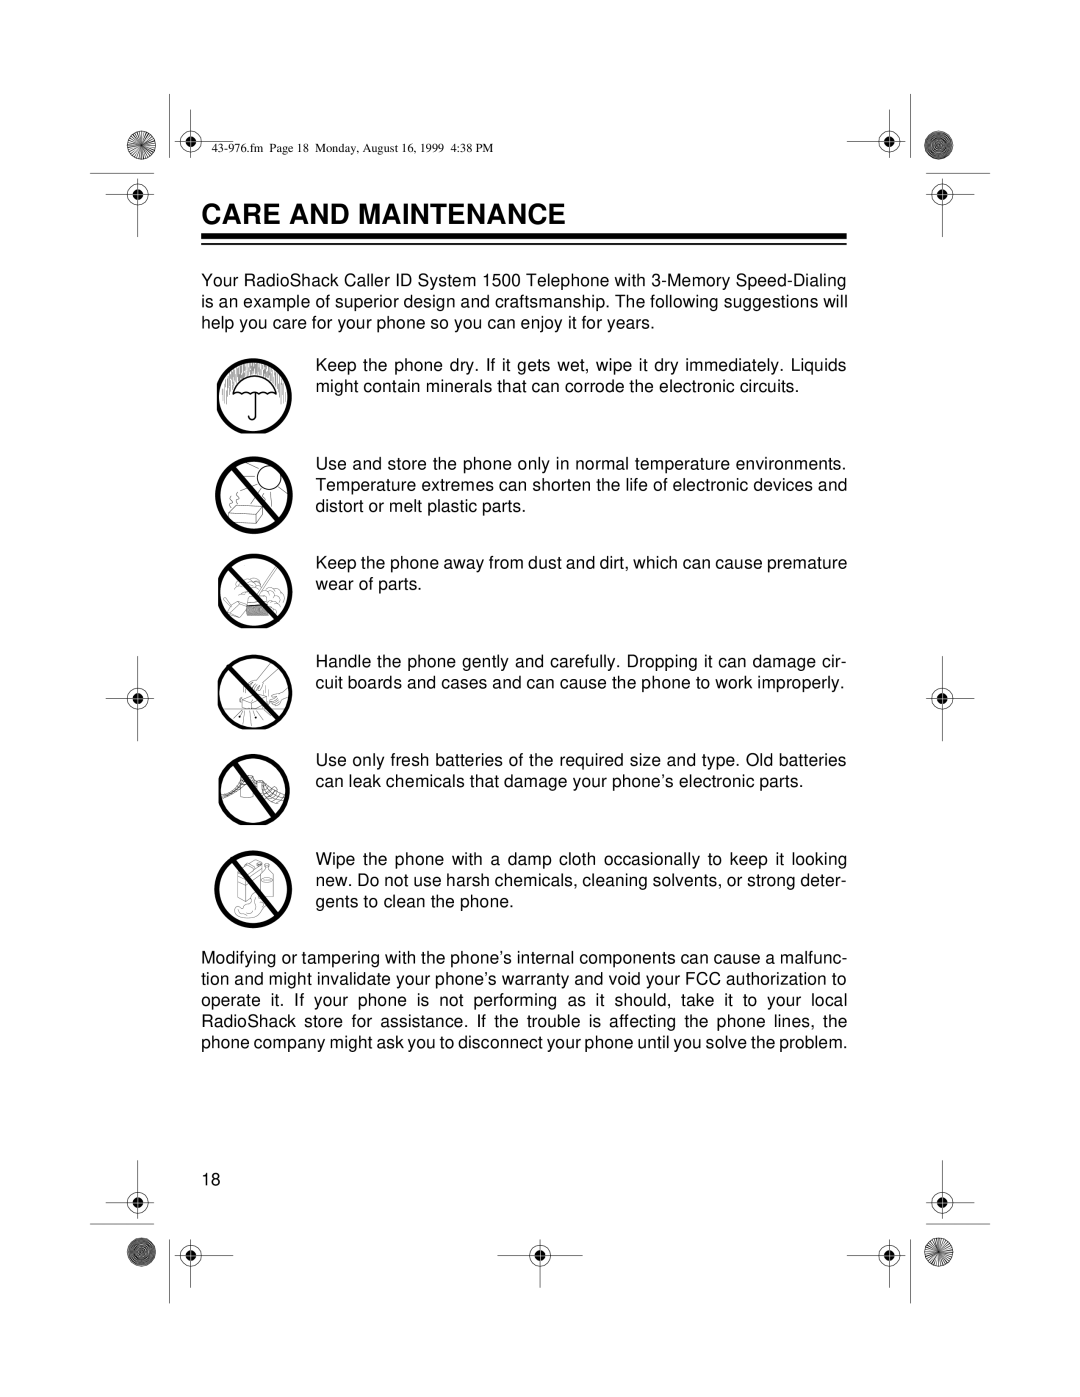 Radio Shack 1500 owner manual Care And Maintenance, fm Page 18 Monday, August 16, 1999 438 PM 